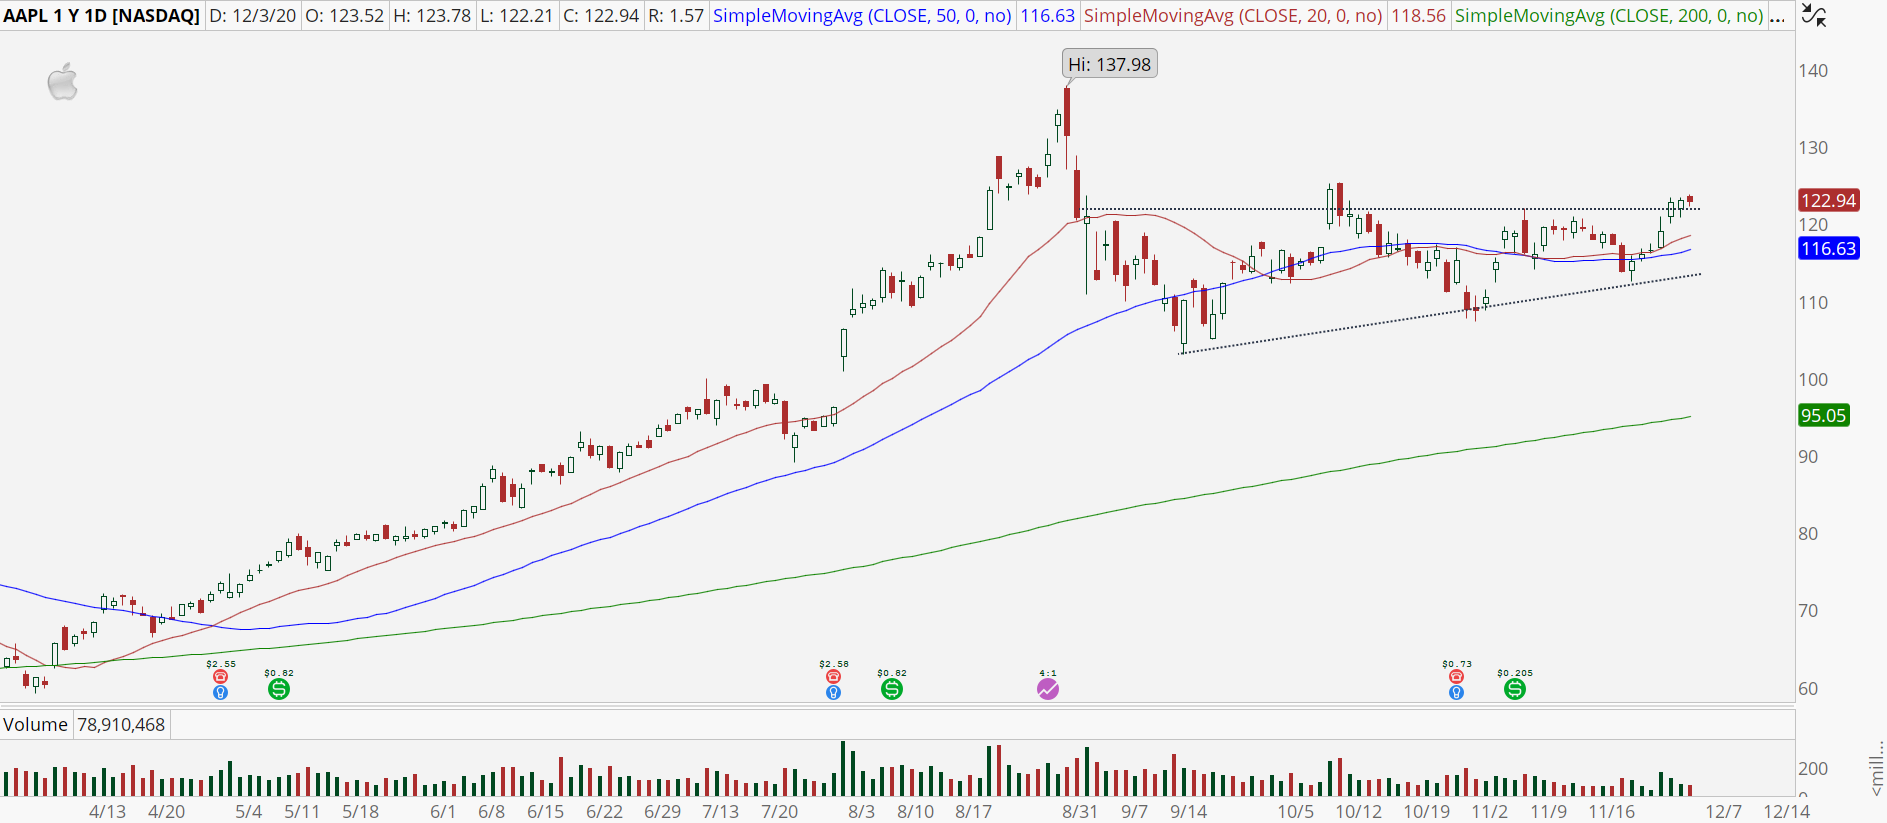 Apple (AAPL) stock daily chart with upside breakout